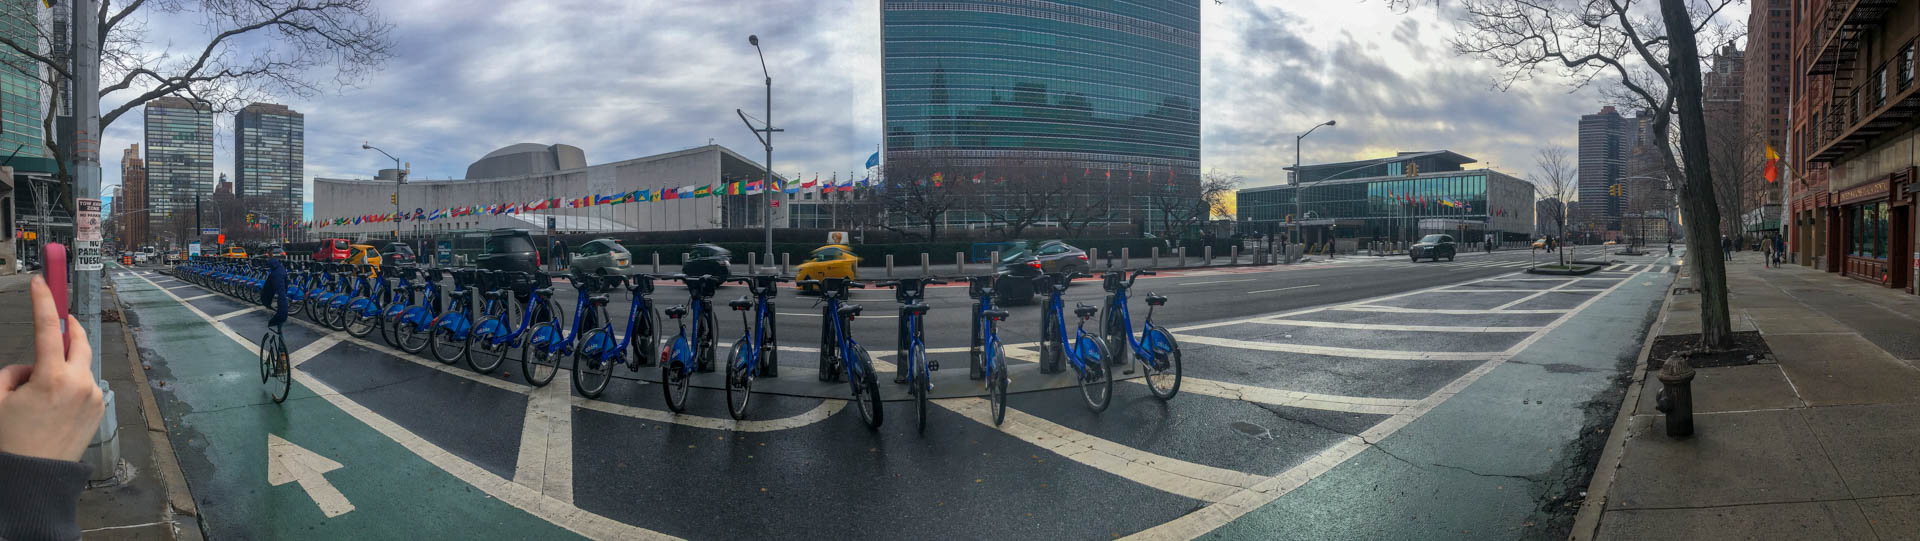 Panoramic photo of New York City outside of the UN.